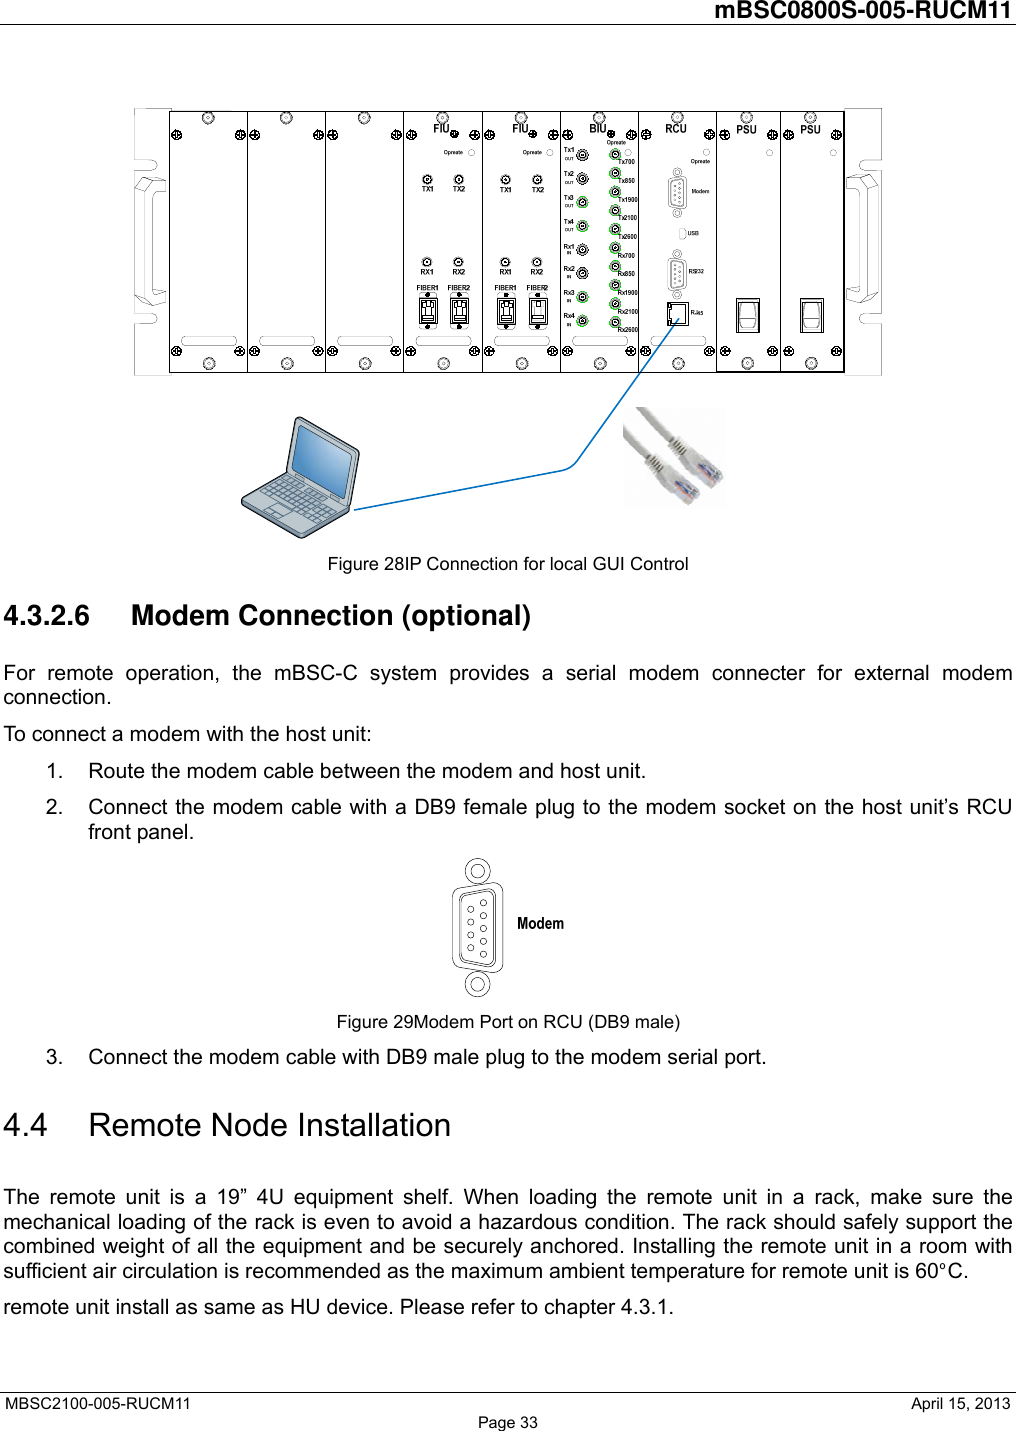         mBSC0800S-005-RUCM11   MBSC2100-005-RUCM11                                              April 15, 2013 Page 33  Figure 28IP Connection for local GUI Control 4.3.2.6 Modem Connection (optional) For remote operation, the mBSC-C system provides a serial modem connecter for external modem connection. To connect a modem with the host unit: 1.  Route the modem cable between the modem and host unit. 2.  Connect the modem cable with a DB9 female plug to the modem socket on the host unit’s RCU front panel.  Figure 29Modem Port on RCU (DB9 male) 3.  Connect the modem cable with DB9 male plug to the modem serial port. 4.4 Remote Node Installation The remote unit is a 19” 4U equipment shelf. When loading the remote unit in a rack, make sure the mechanical loading of the rack is even to avoid a hazardous condition. The rack should safely support the combined weight of all the equipment and be securely anchored. Installing the remote unit in a room with sufficient air circulation is recommended as the maximum ambient temperature for remote unit is 60°C.  remote unit install as same as HU device. Please refer to chapter 4.3.1.    